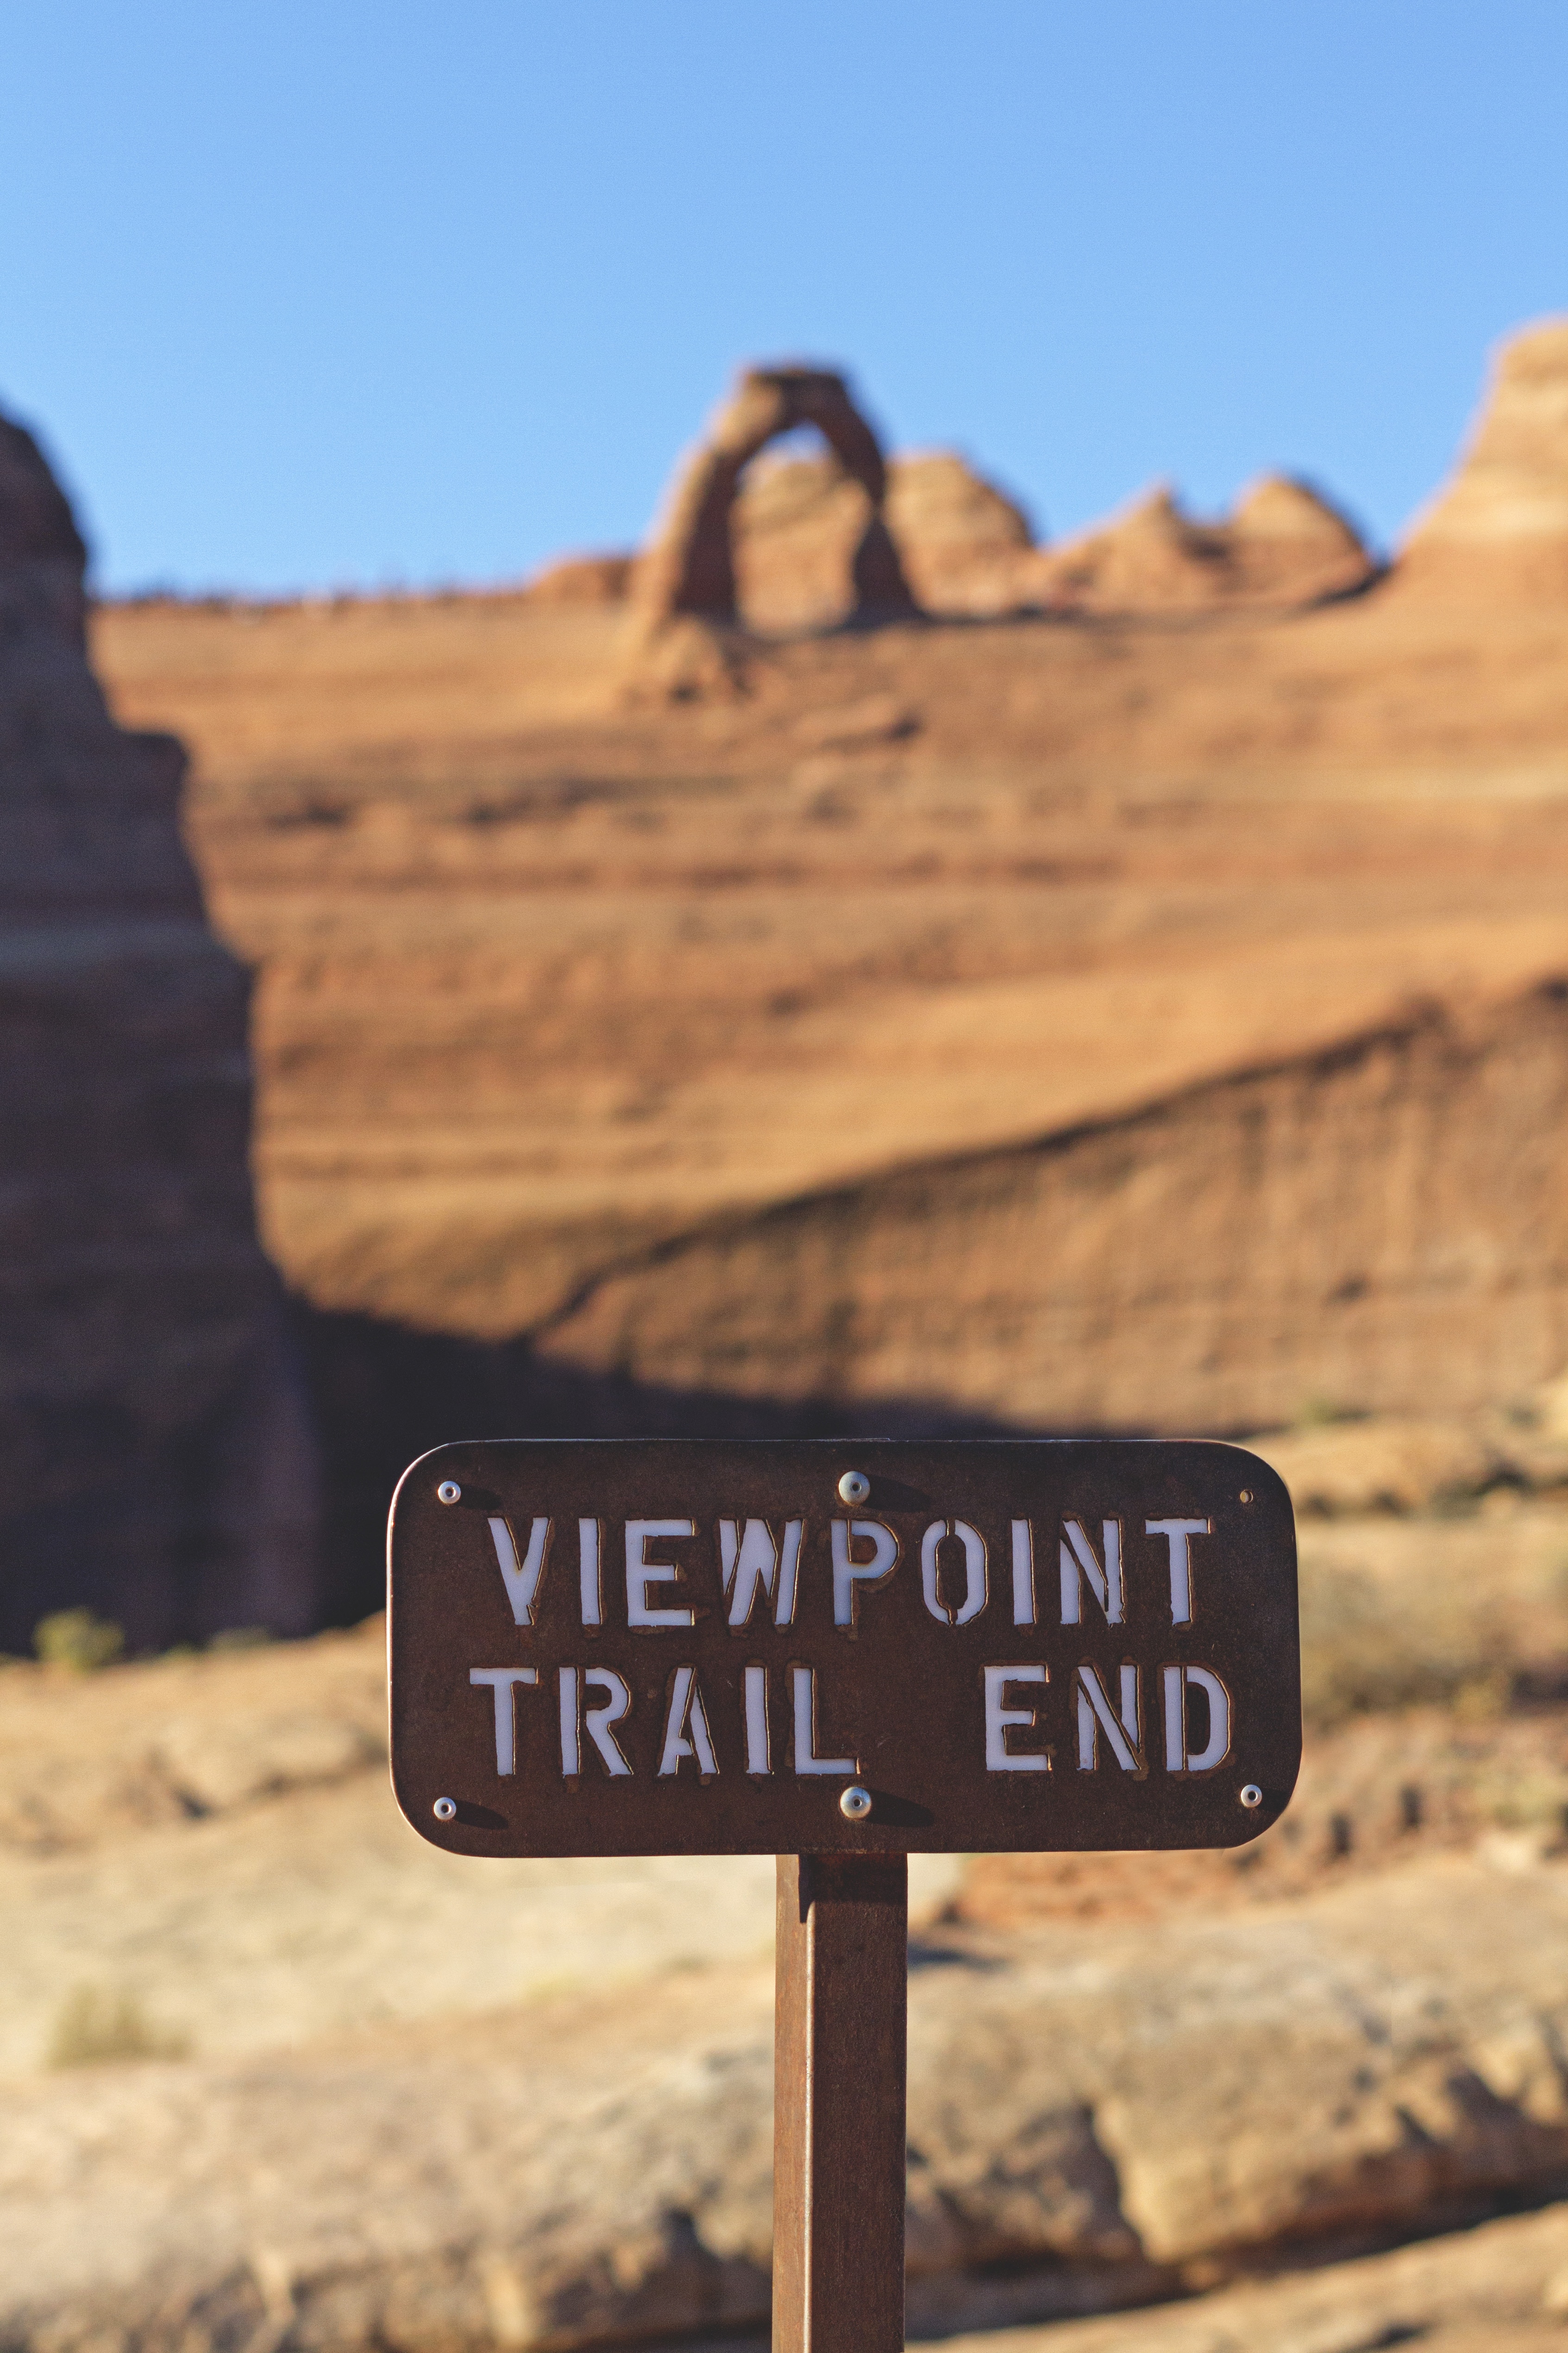 viewpoint trail end signboard in day time